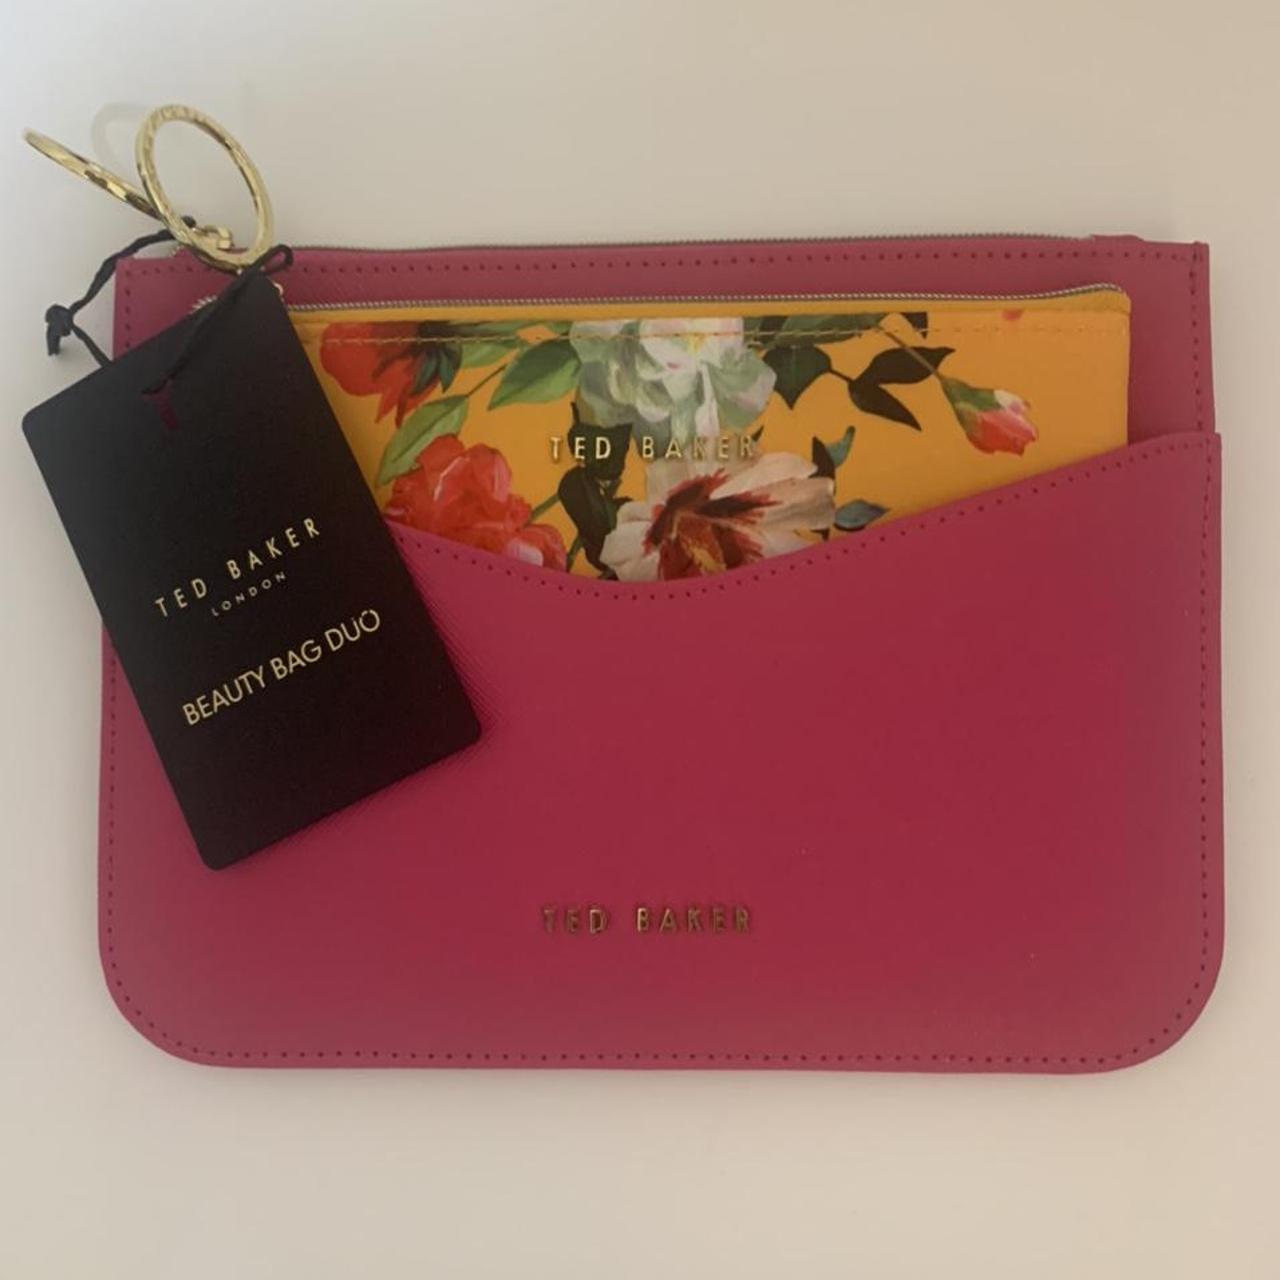 Product Image 1 - Ted Baker beauty bag duo

Brand